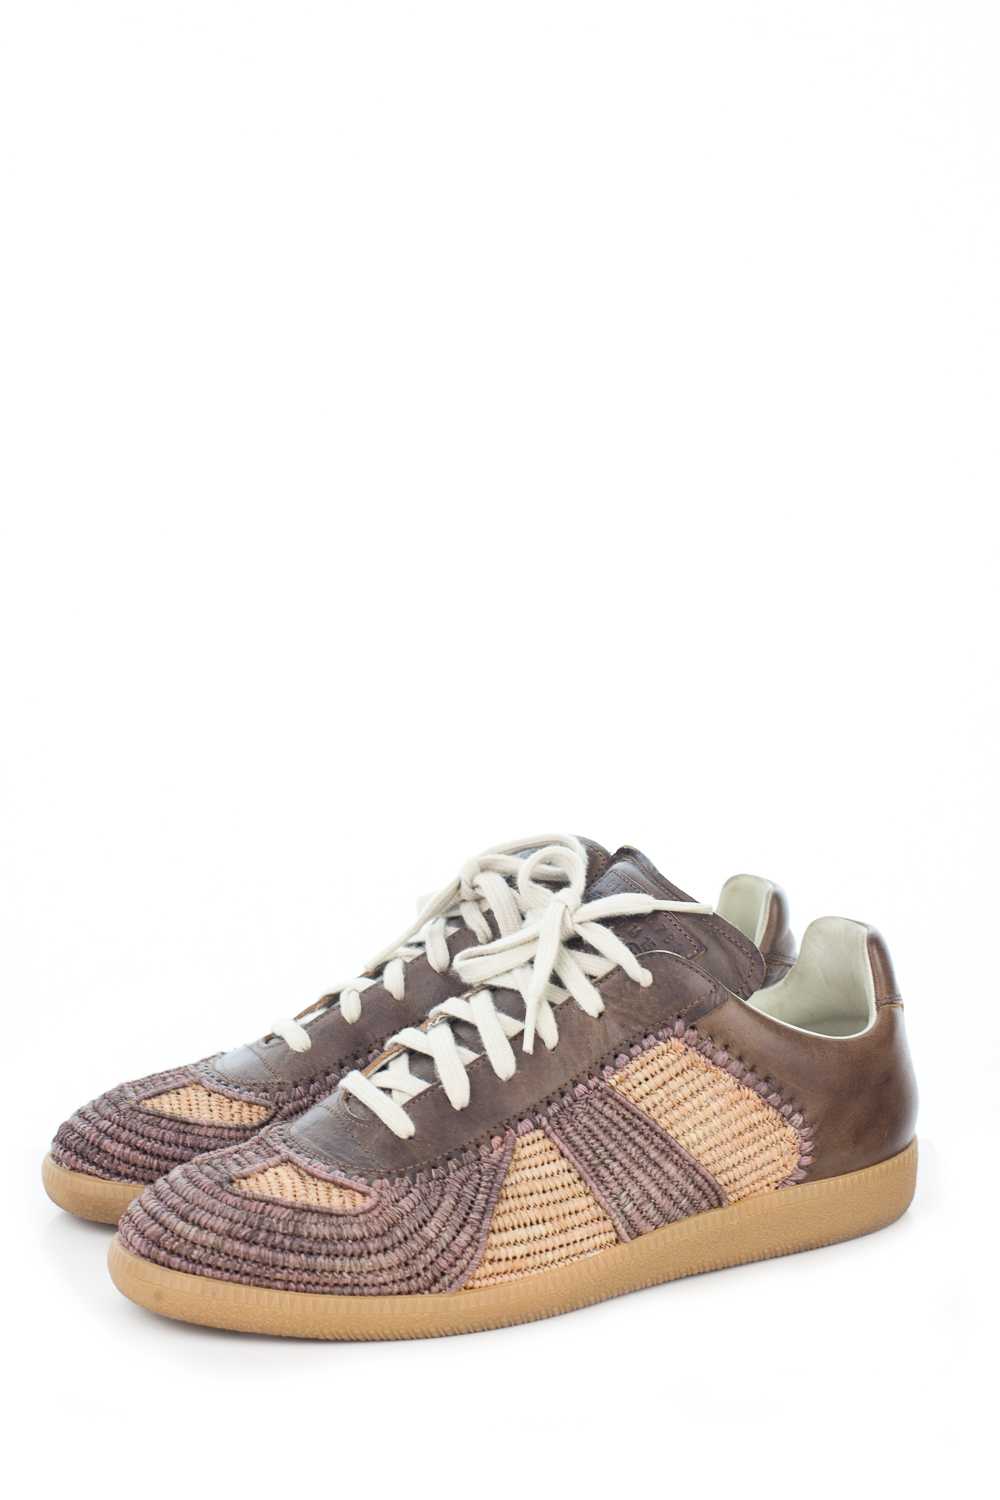 Woven Basketweave German Army Trainers - image 2